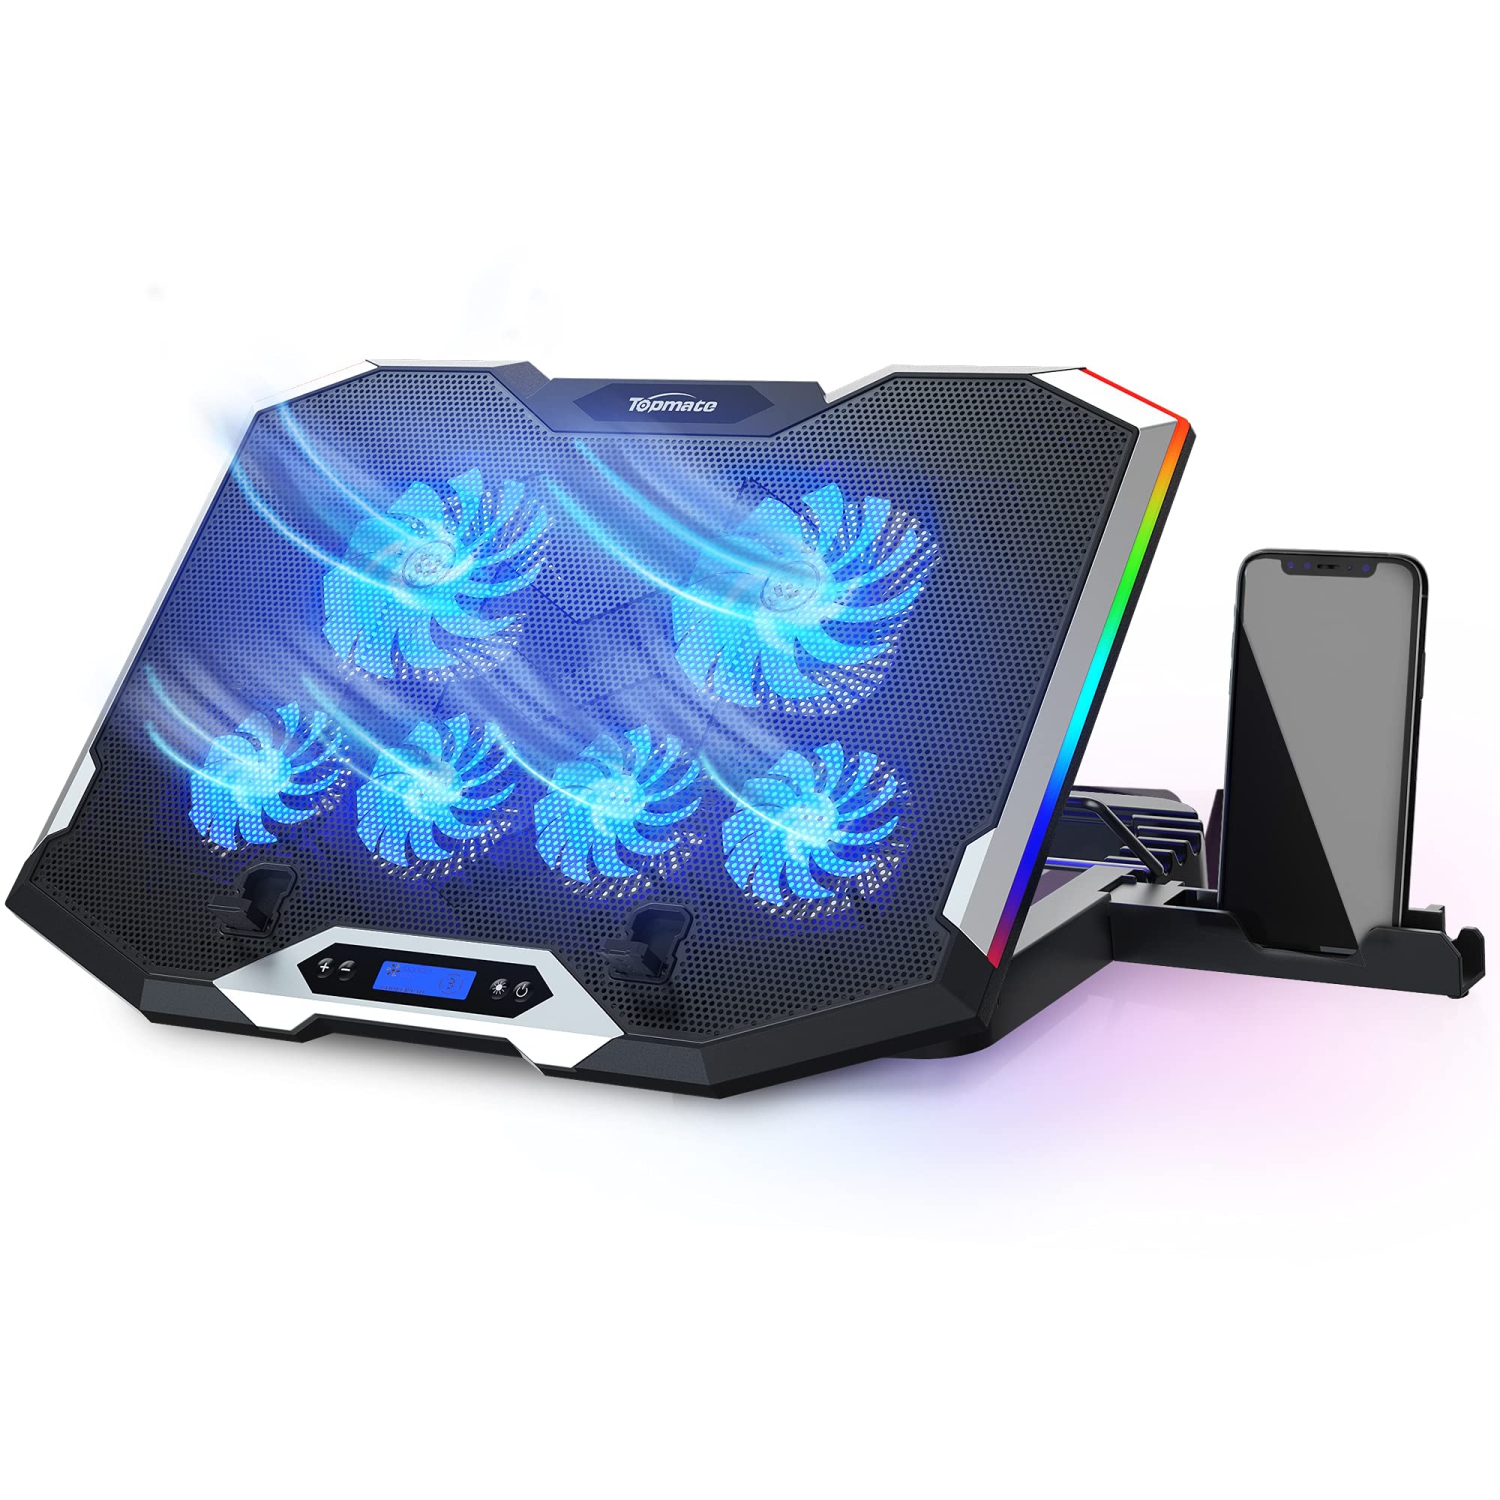 TopMate C11 Laptop Cooling Pad RGB Gaming Notebook Cooler, Laptop Fan Stand Adjustable Height with 6 Quiet Fans and Phone Ho